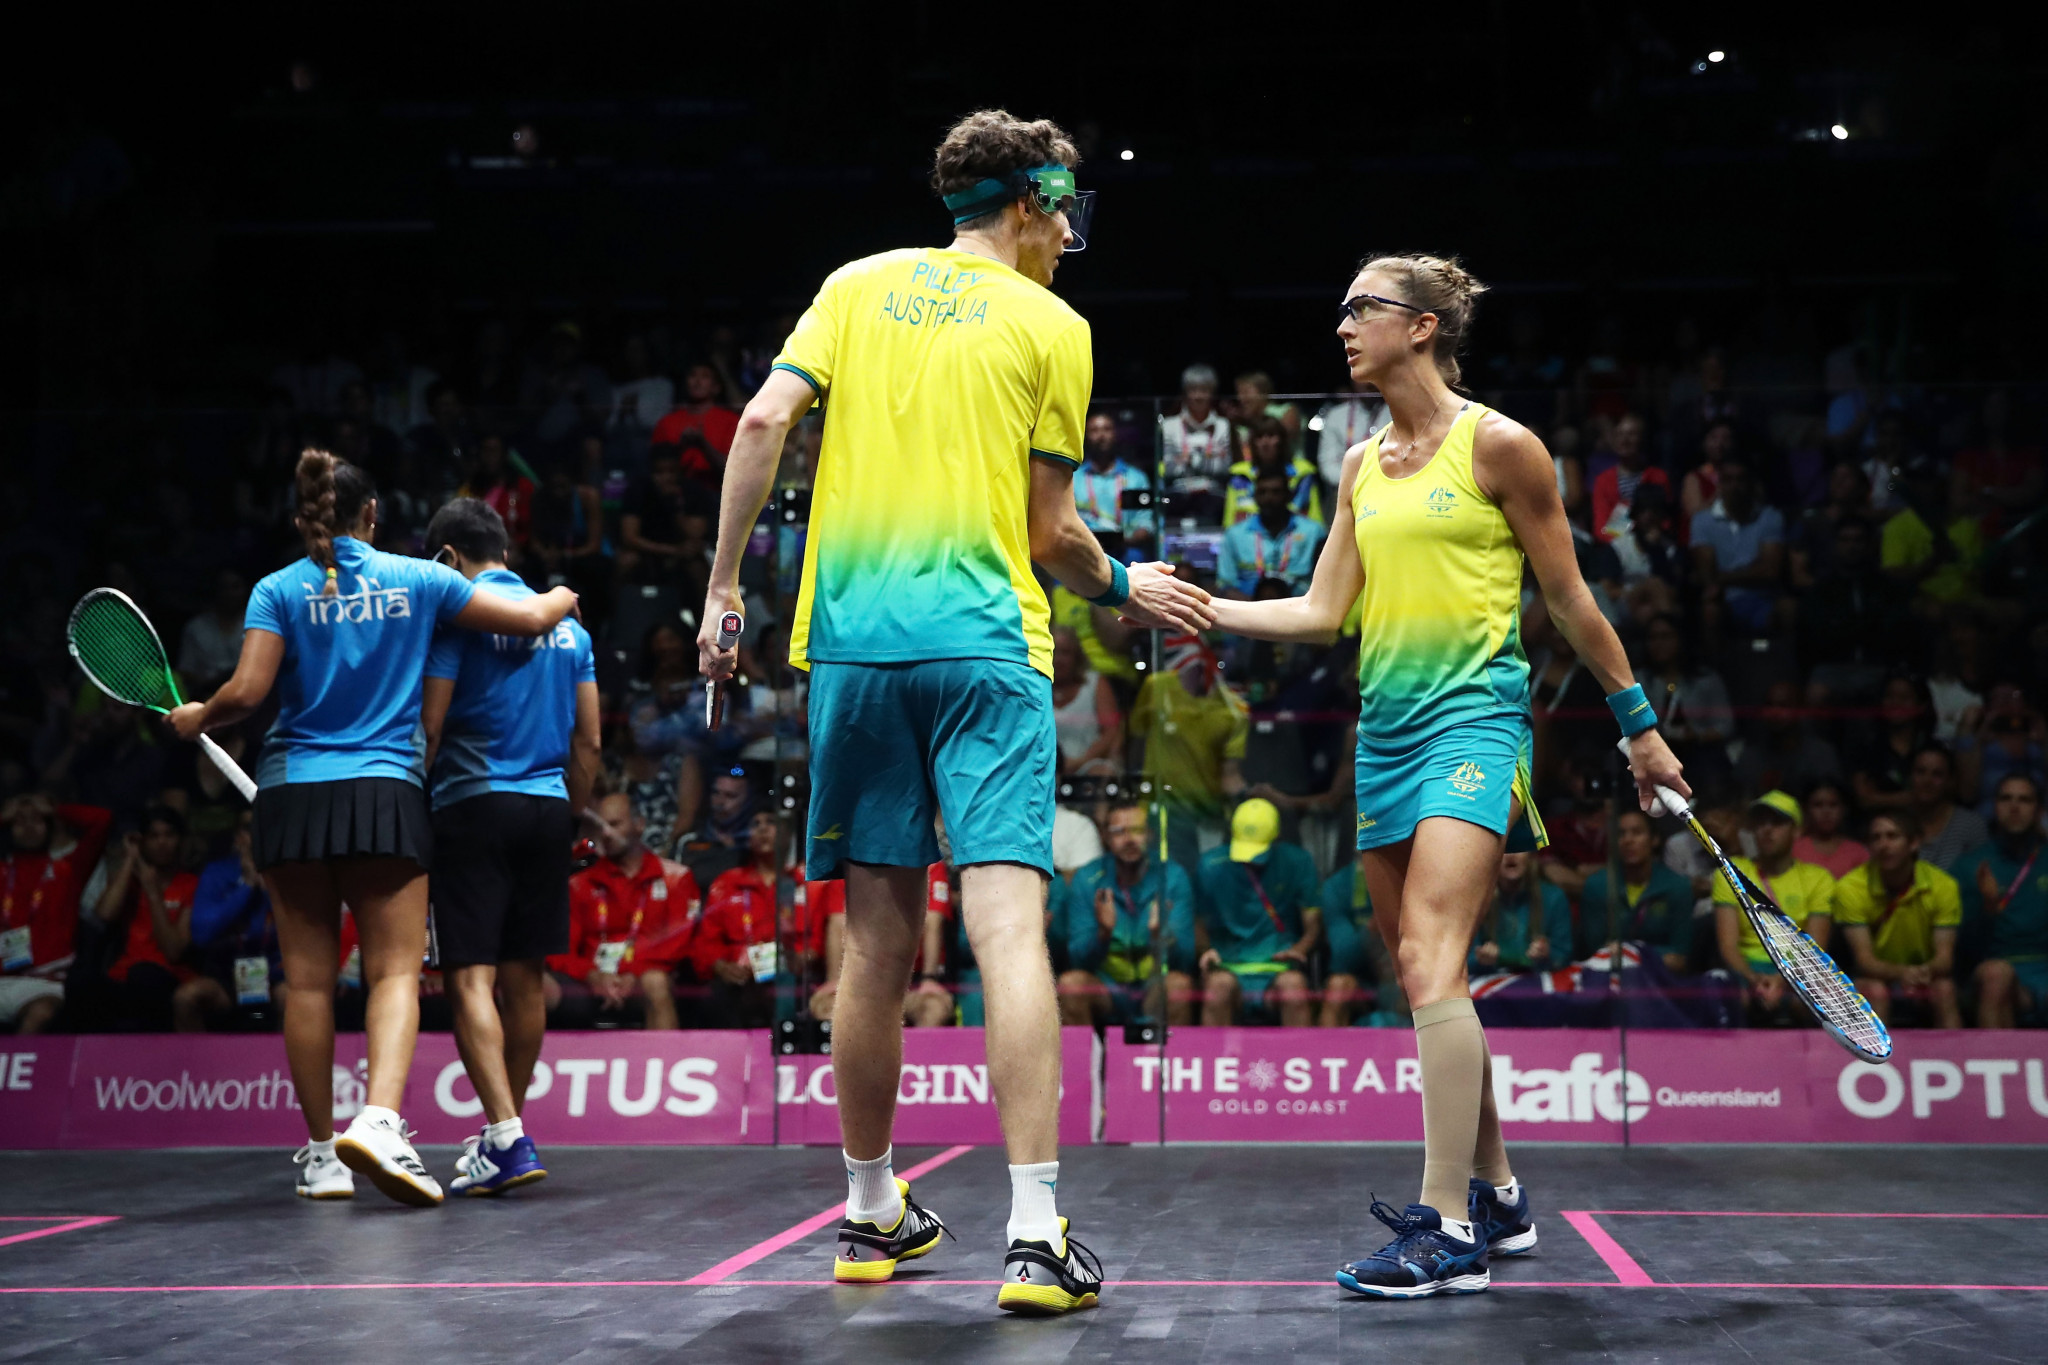 Hosts Australia won their first squash medal of the Games after cousins Donna Urquhart and Cameron Pilley defeated India’s Dipika Pallikal Karthik and Saurav Ghosal in the mixed doubles final ©Getty Images